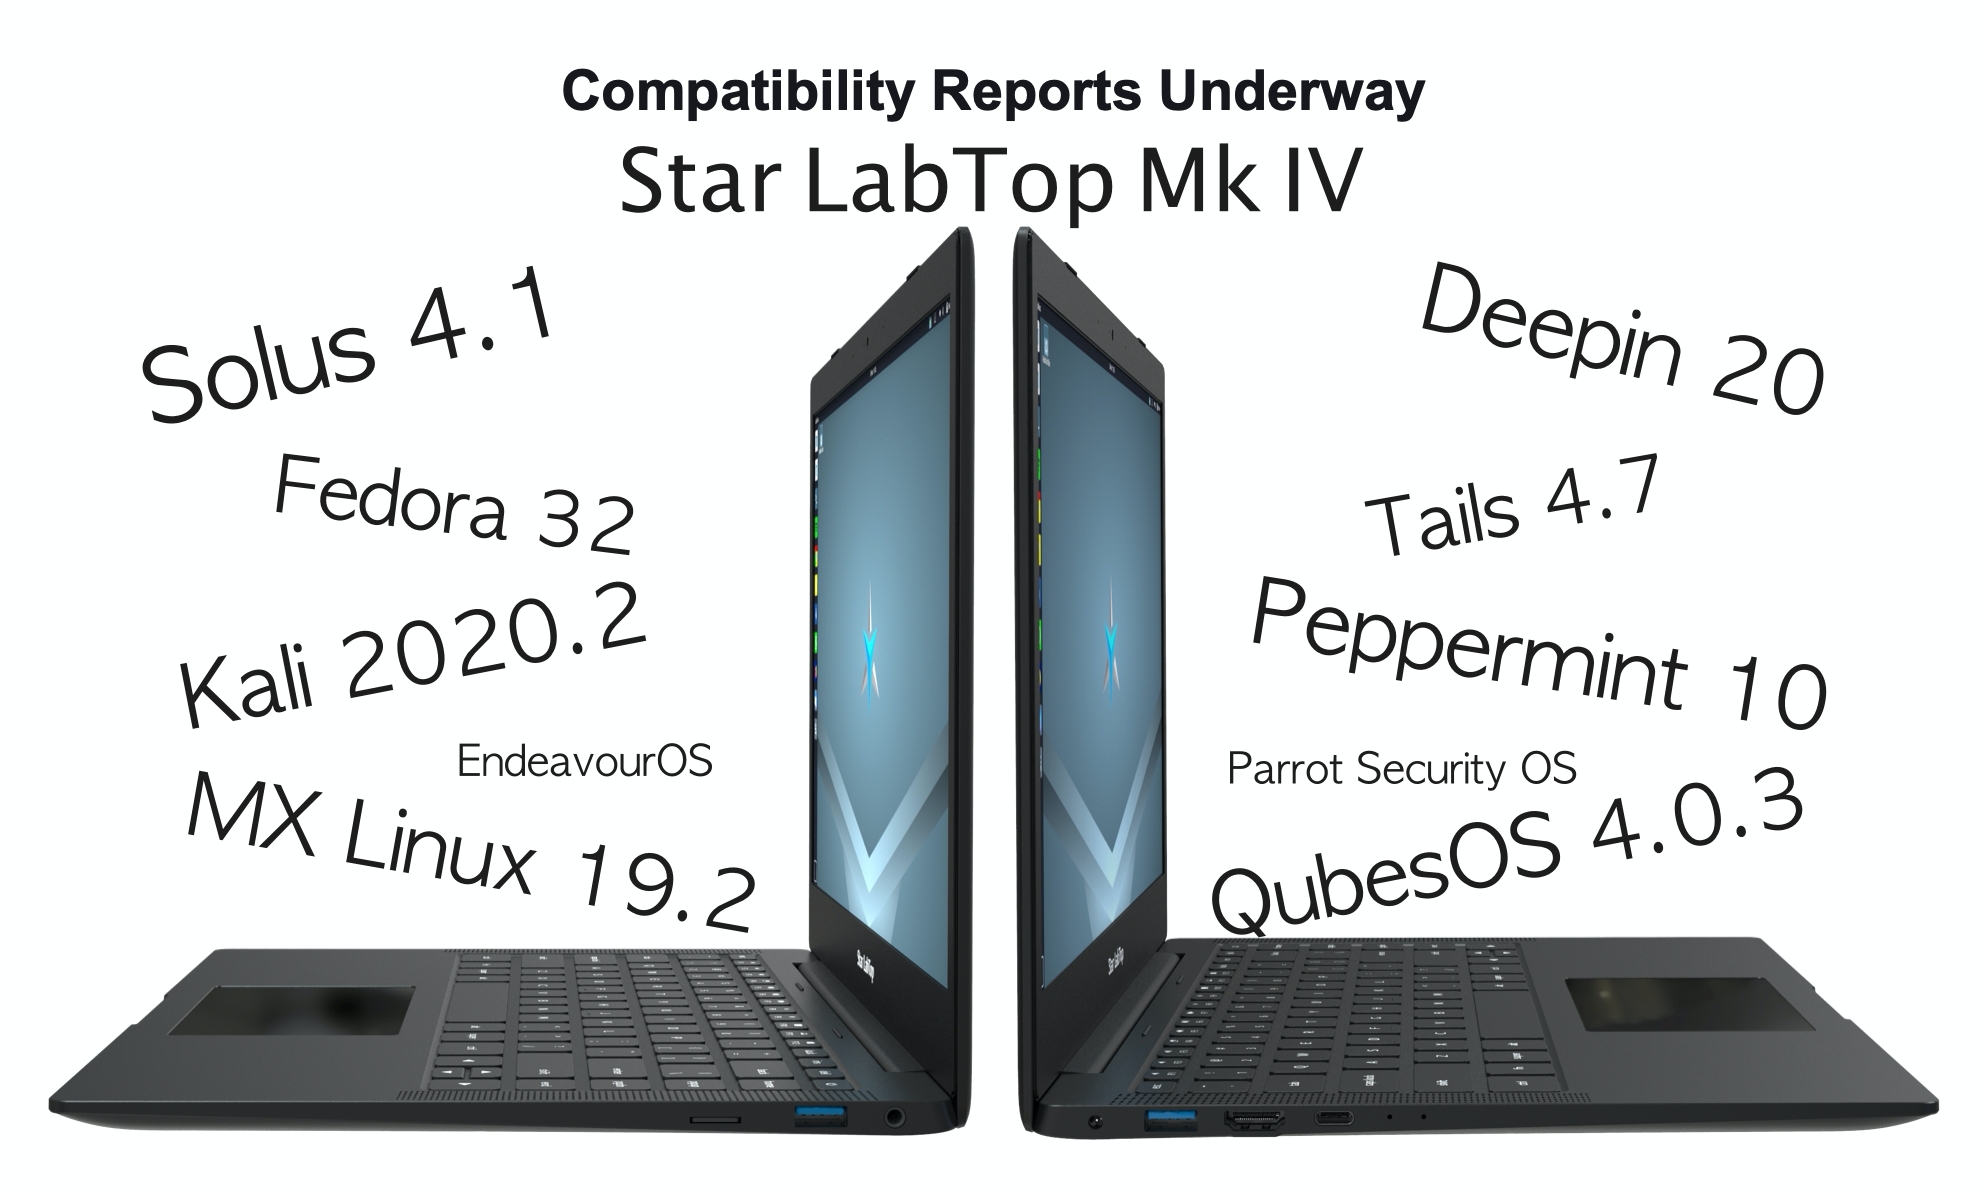 Star Labs’ Latest Linux Laptop Now Works with Solus, Deepin, Kali Linux, Tails, and More